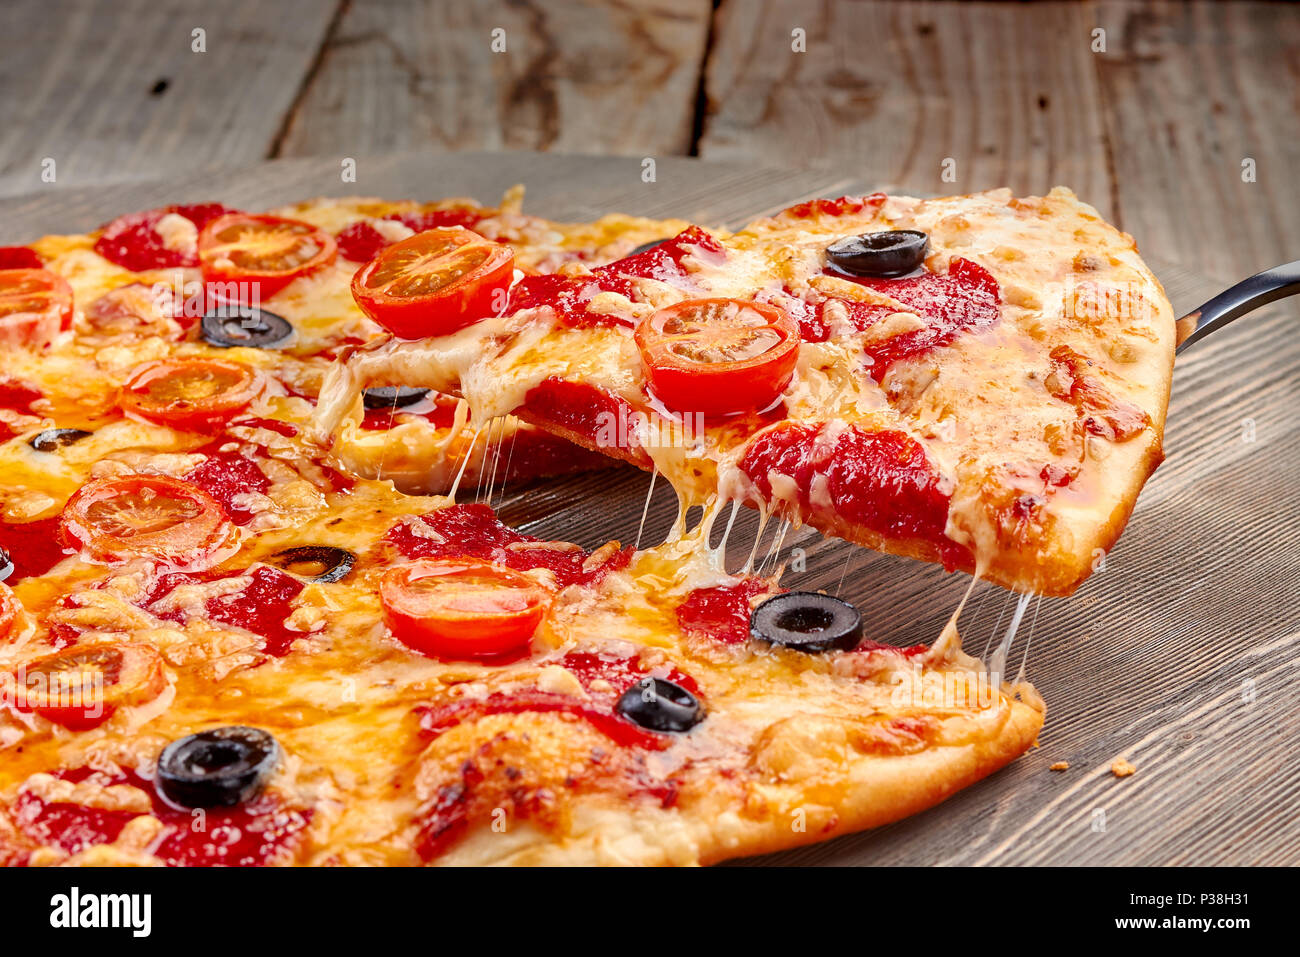 Lifted pepperoni pizza slice with melted cheese Stock Photo